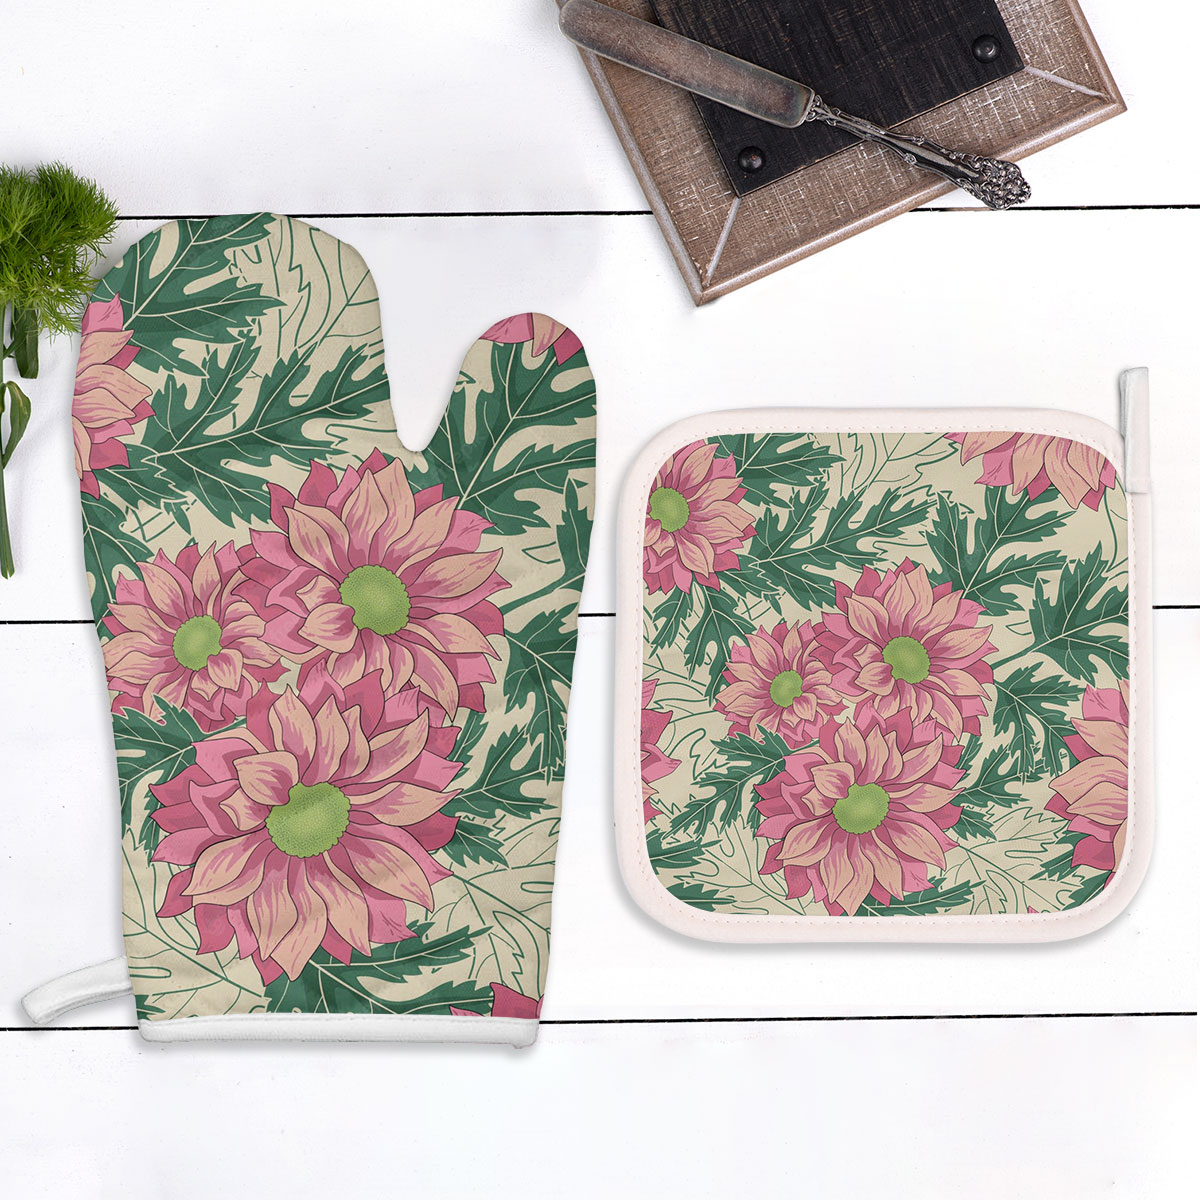 Vintage Chrysanthemum Flowers And Leaves Oven Mitts Pot Holder Set